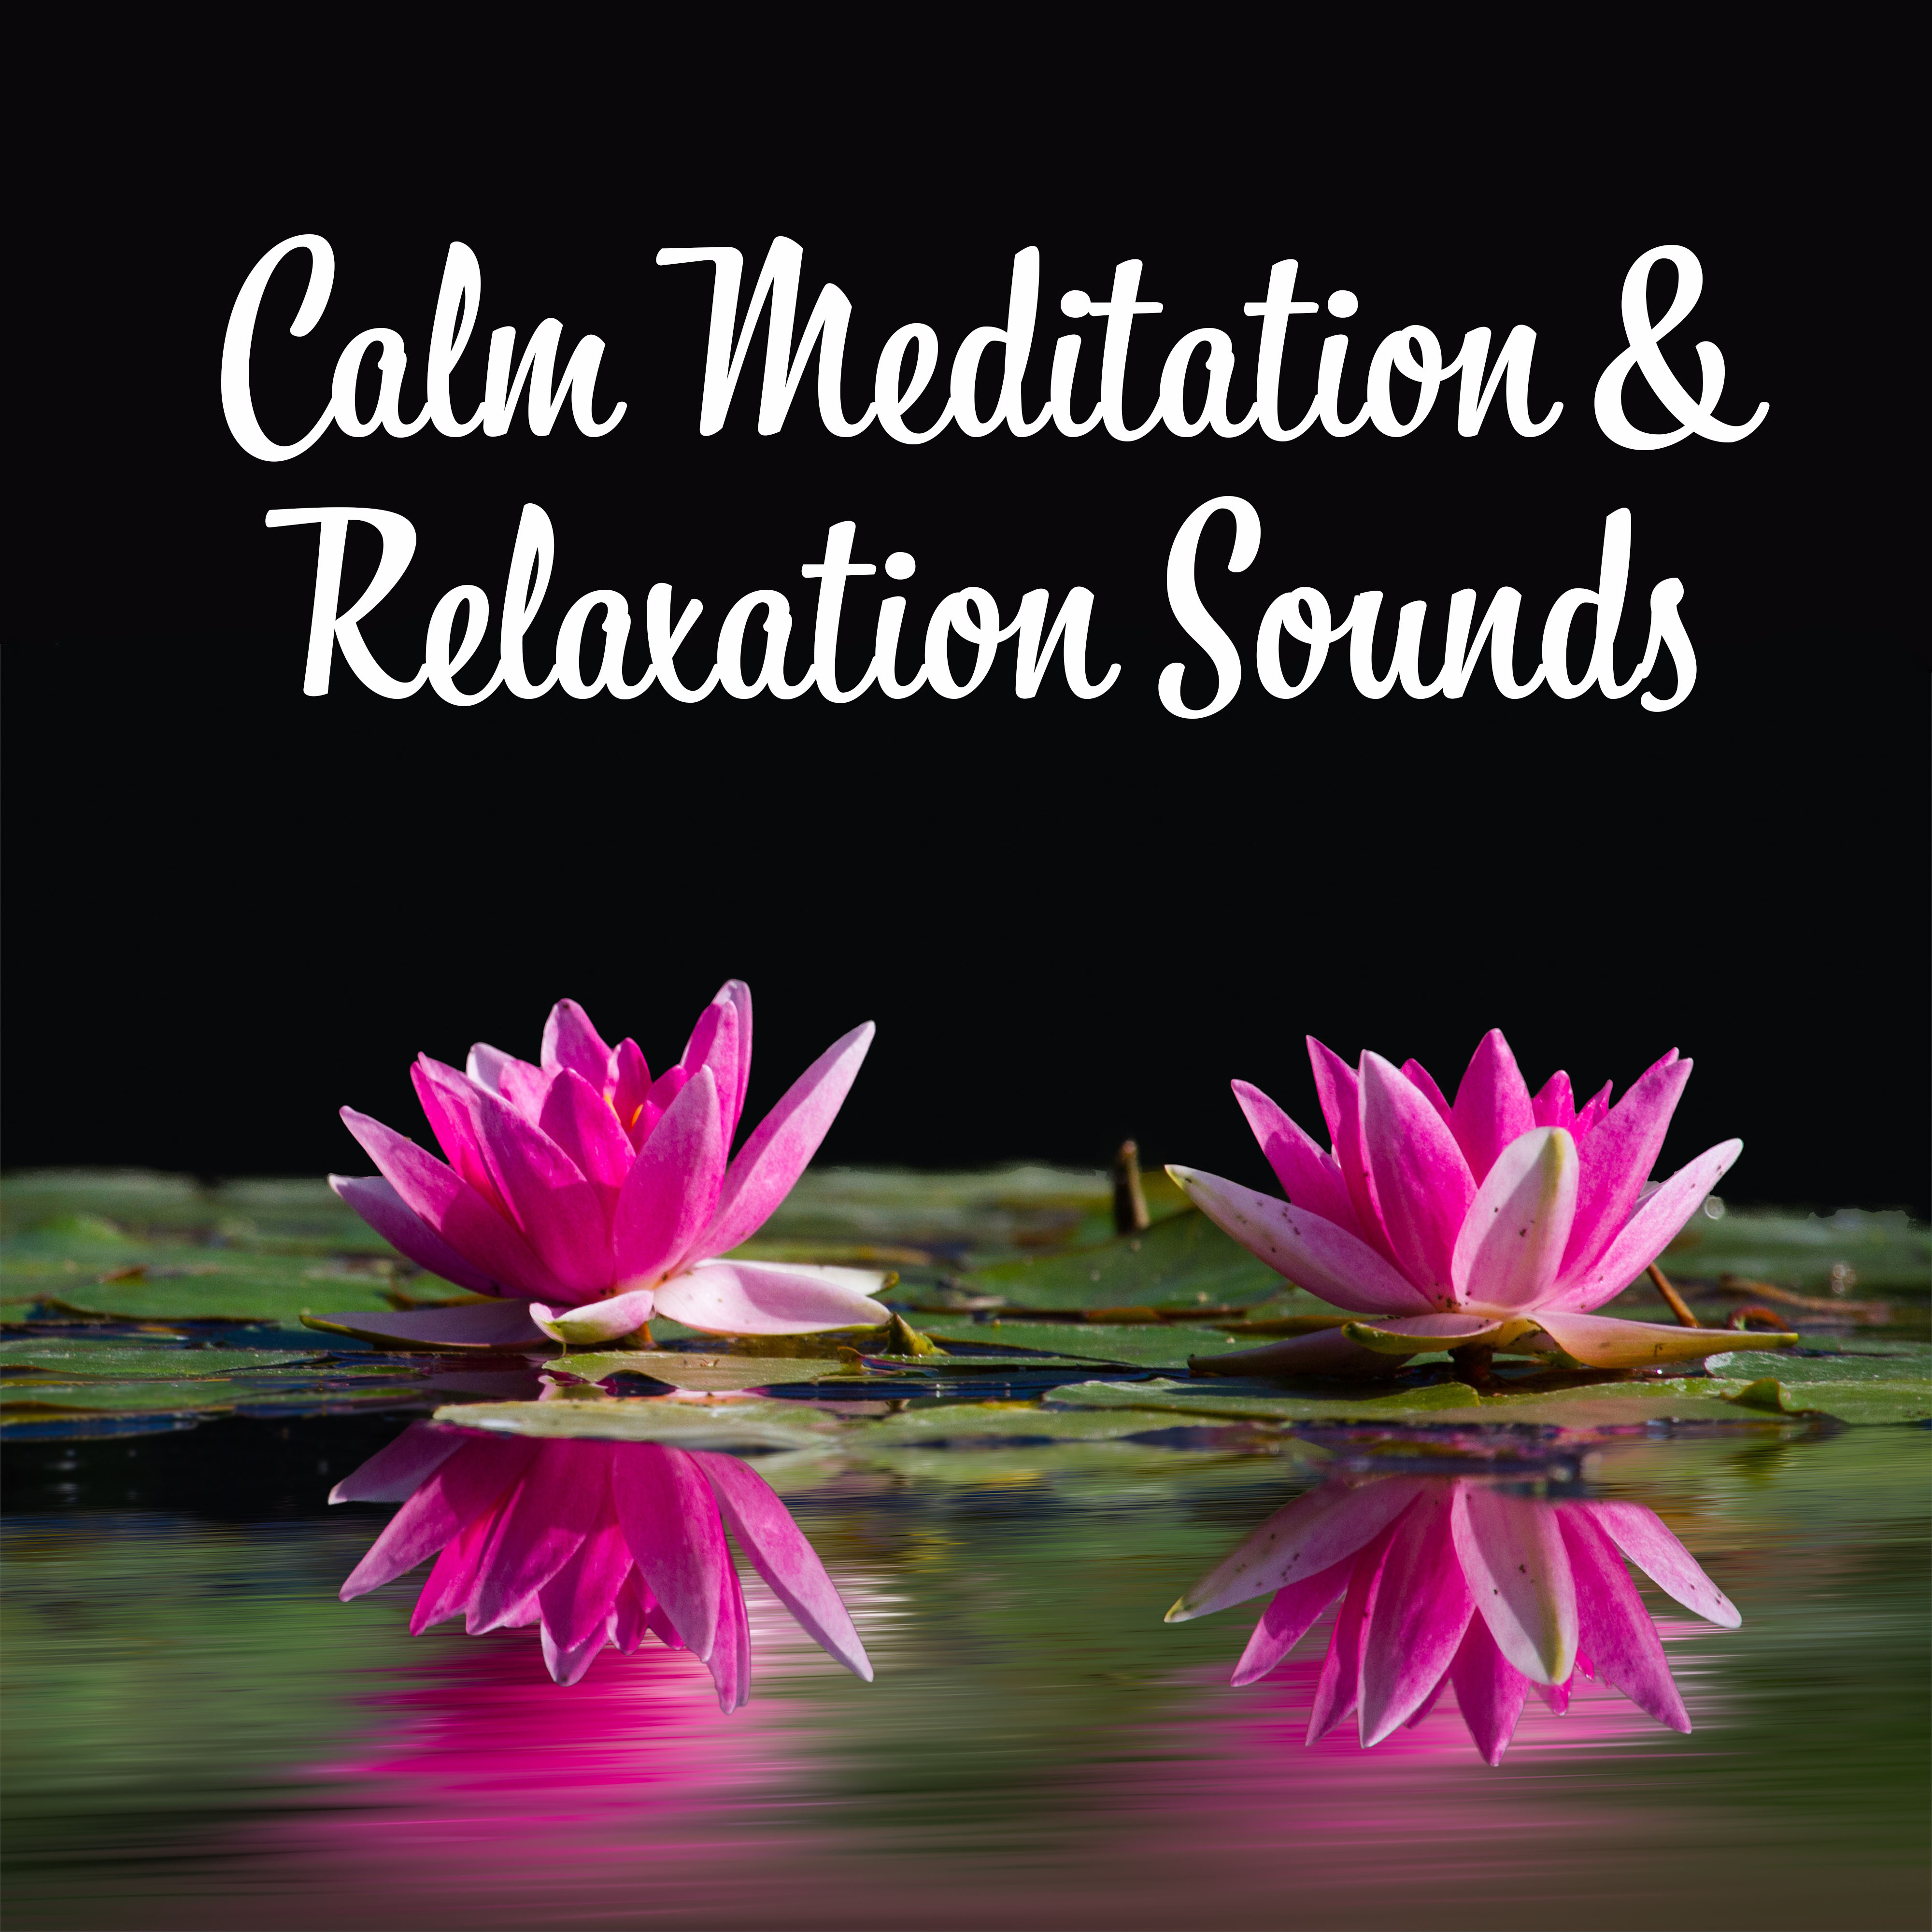 Calm Meditation  Relaxation Sounds  Buddha Lounge, New Age Music to Meditate, Peaceful Waves, Easy Listening